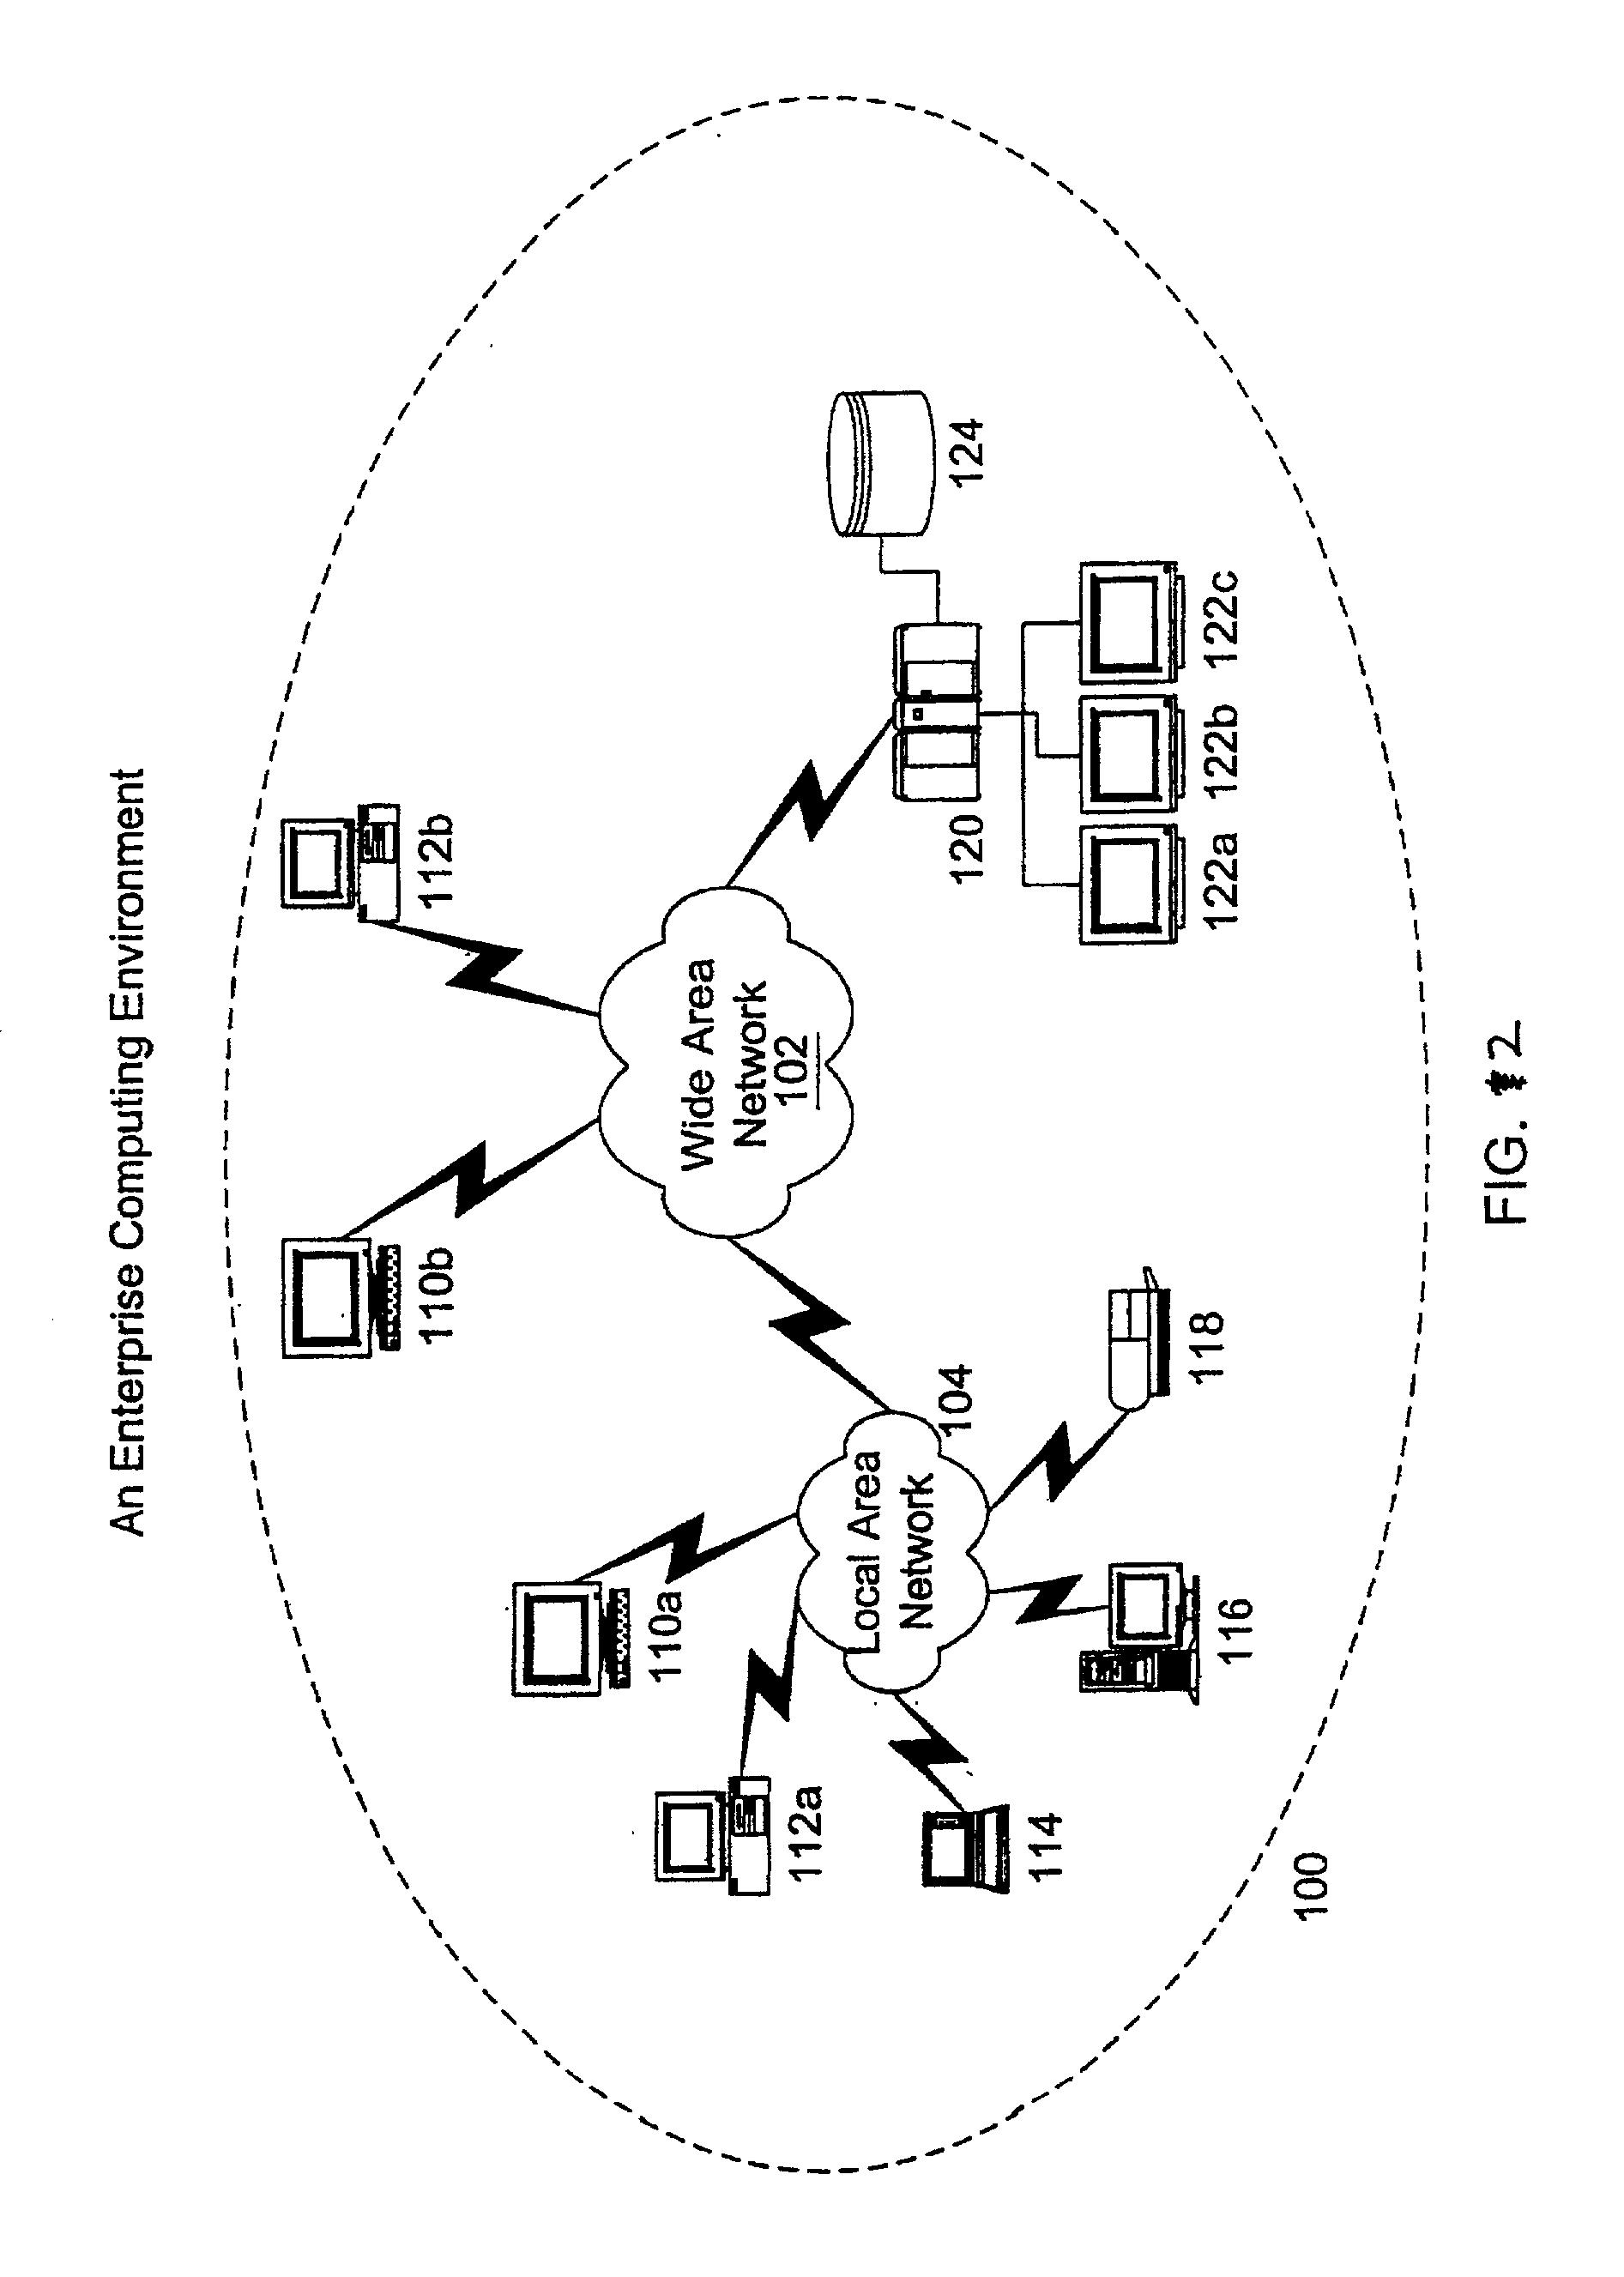 Synthetic transaction monitor